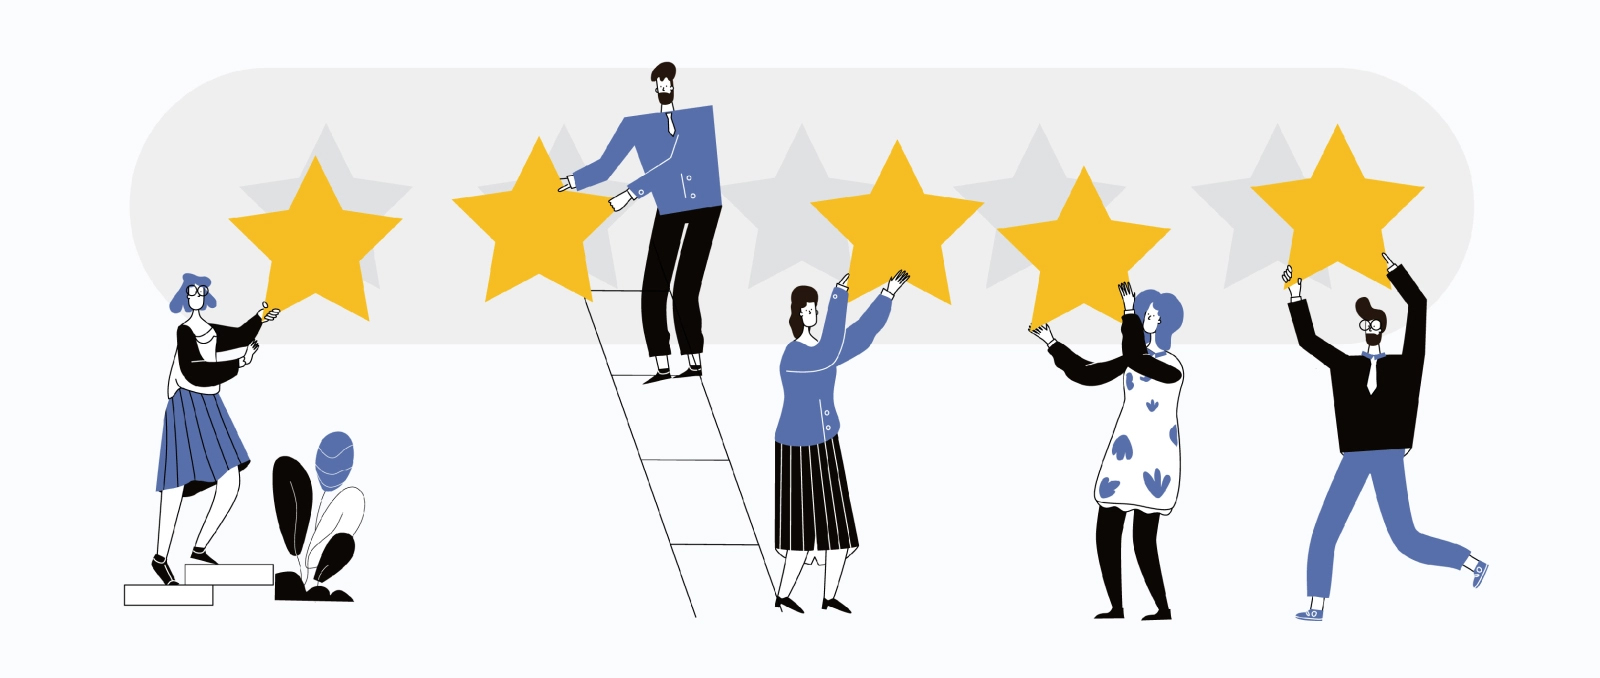 50 tips to get 5-star reviews